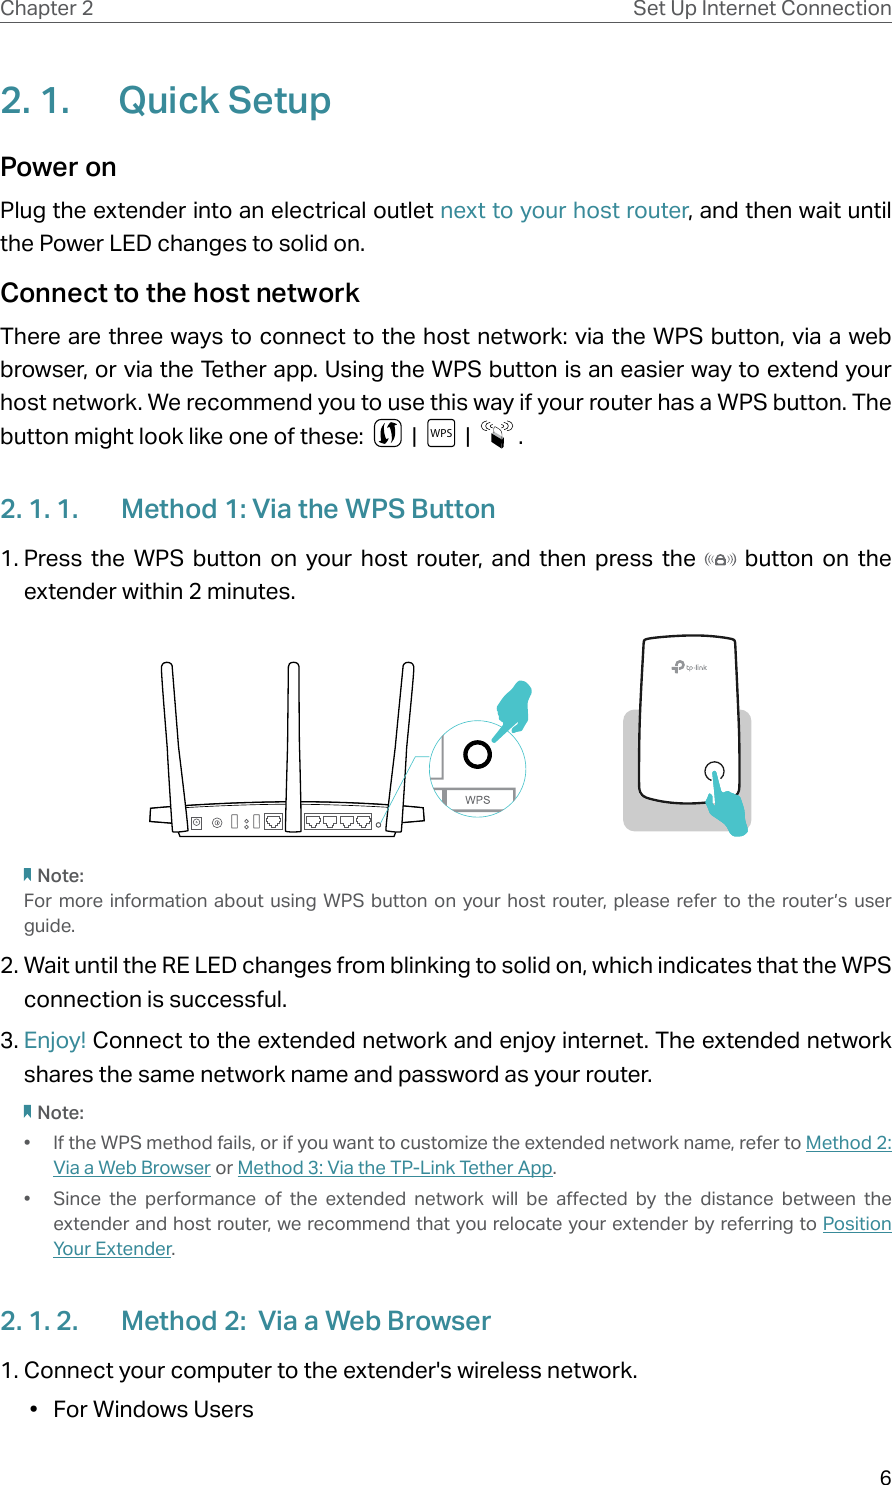 6Chapter 2 Set Up Internet Connection2. 1.  Quick SetupPower on Plug the extender into an electrical outlet next to your host router, and then wait until the Power LED changes to solid on.Connect to the host network There are three ways to connect to the host network: via the WPS button, via a web browser, or via the Tether app. Using the WPS button is an easier way to extend your host network. We recommend you to use this way if your router has a WPS button. The button might look like one of these:     |  WPS   |    .2. 1. 1.  Method 1: Via the WPS Button1. Press the WPS button on your host router, and then press the   button on the extender within 2 minutes.Note:For more information about using WPS button on your host router, please refer to the router’s user guide.2. Wait until the RE LED changes from blinking to solid on, which indicates that the WPS connection is successful. 3. Enjoy! Connect to the extended network and enjoy internet. The extended network shares the same network name and password as your router.Note:•  If the WPS method fails, or if you want to customize the extended network name, refer to Method  2:  Via a Web Browser or Method 3: Via the TP-Link Tether App.•  Since the performance of the extended network will be affected by the distance between the extender and host router, we recommend that you relocate your extender by referring to Position Your Extender.2. 1. 2.  Method 2:  Via a Web Browser1. Connect your computer to the extender&apos;s wireless network.•  For Windows Users 